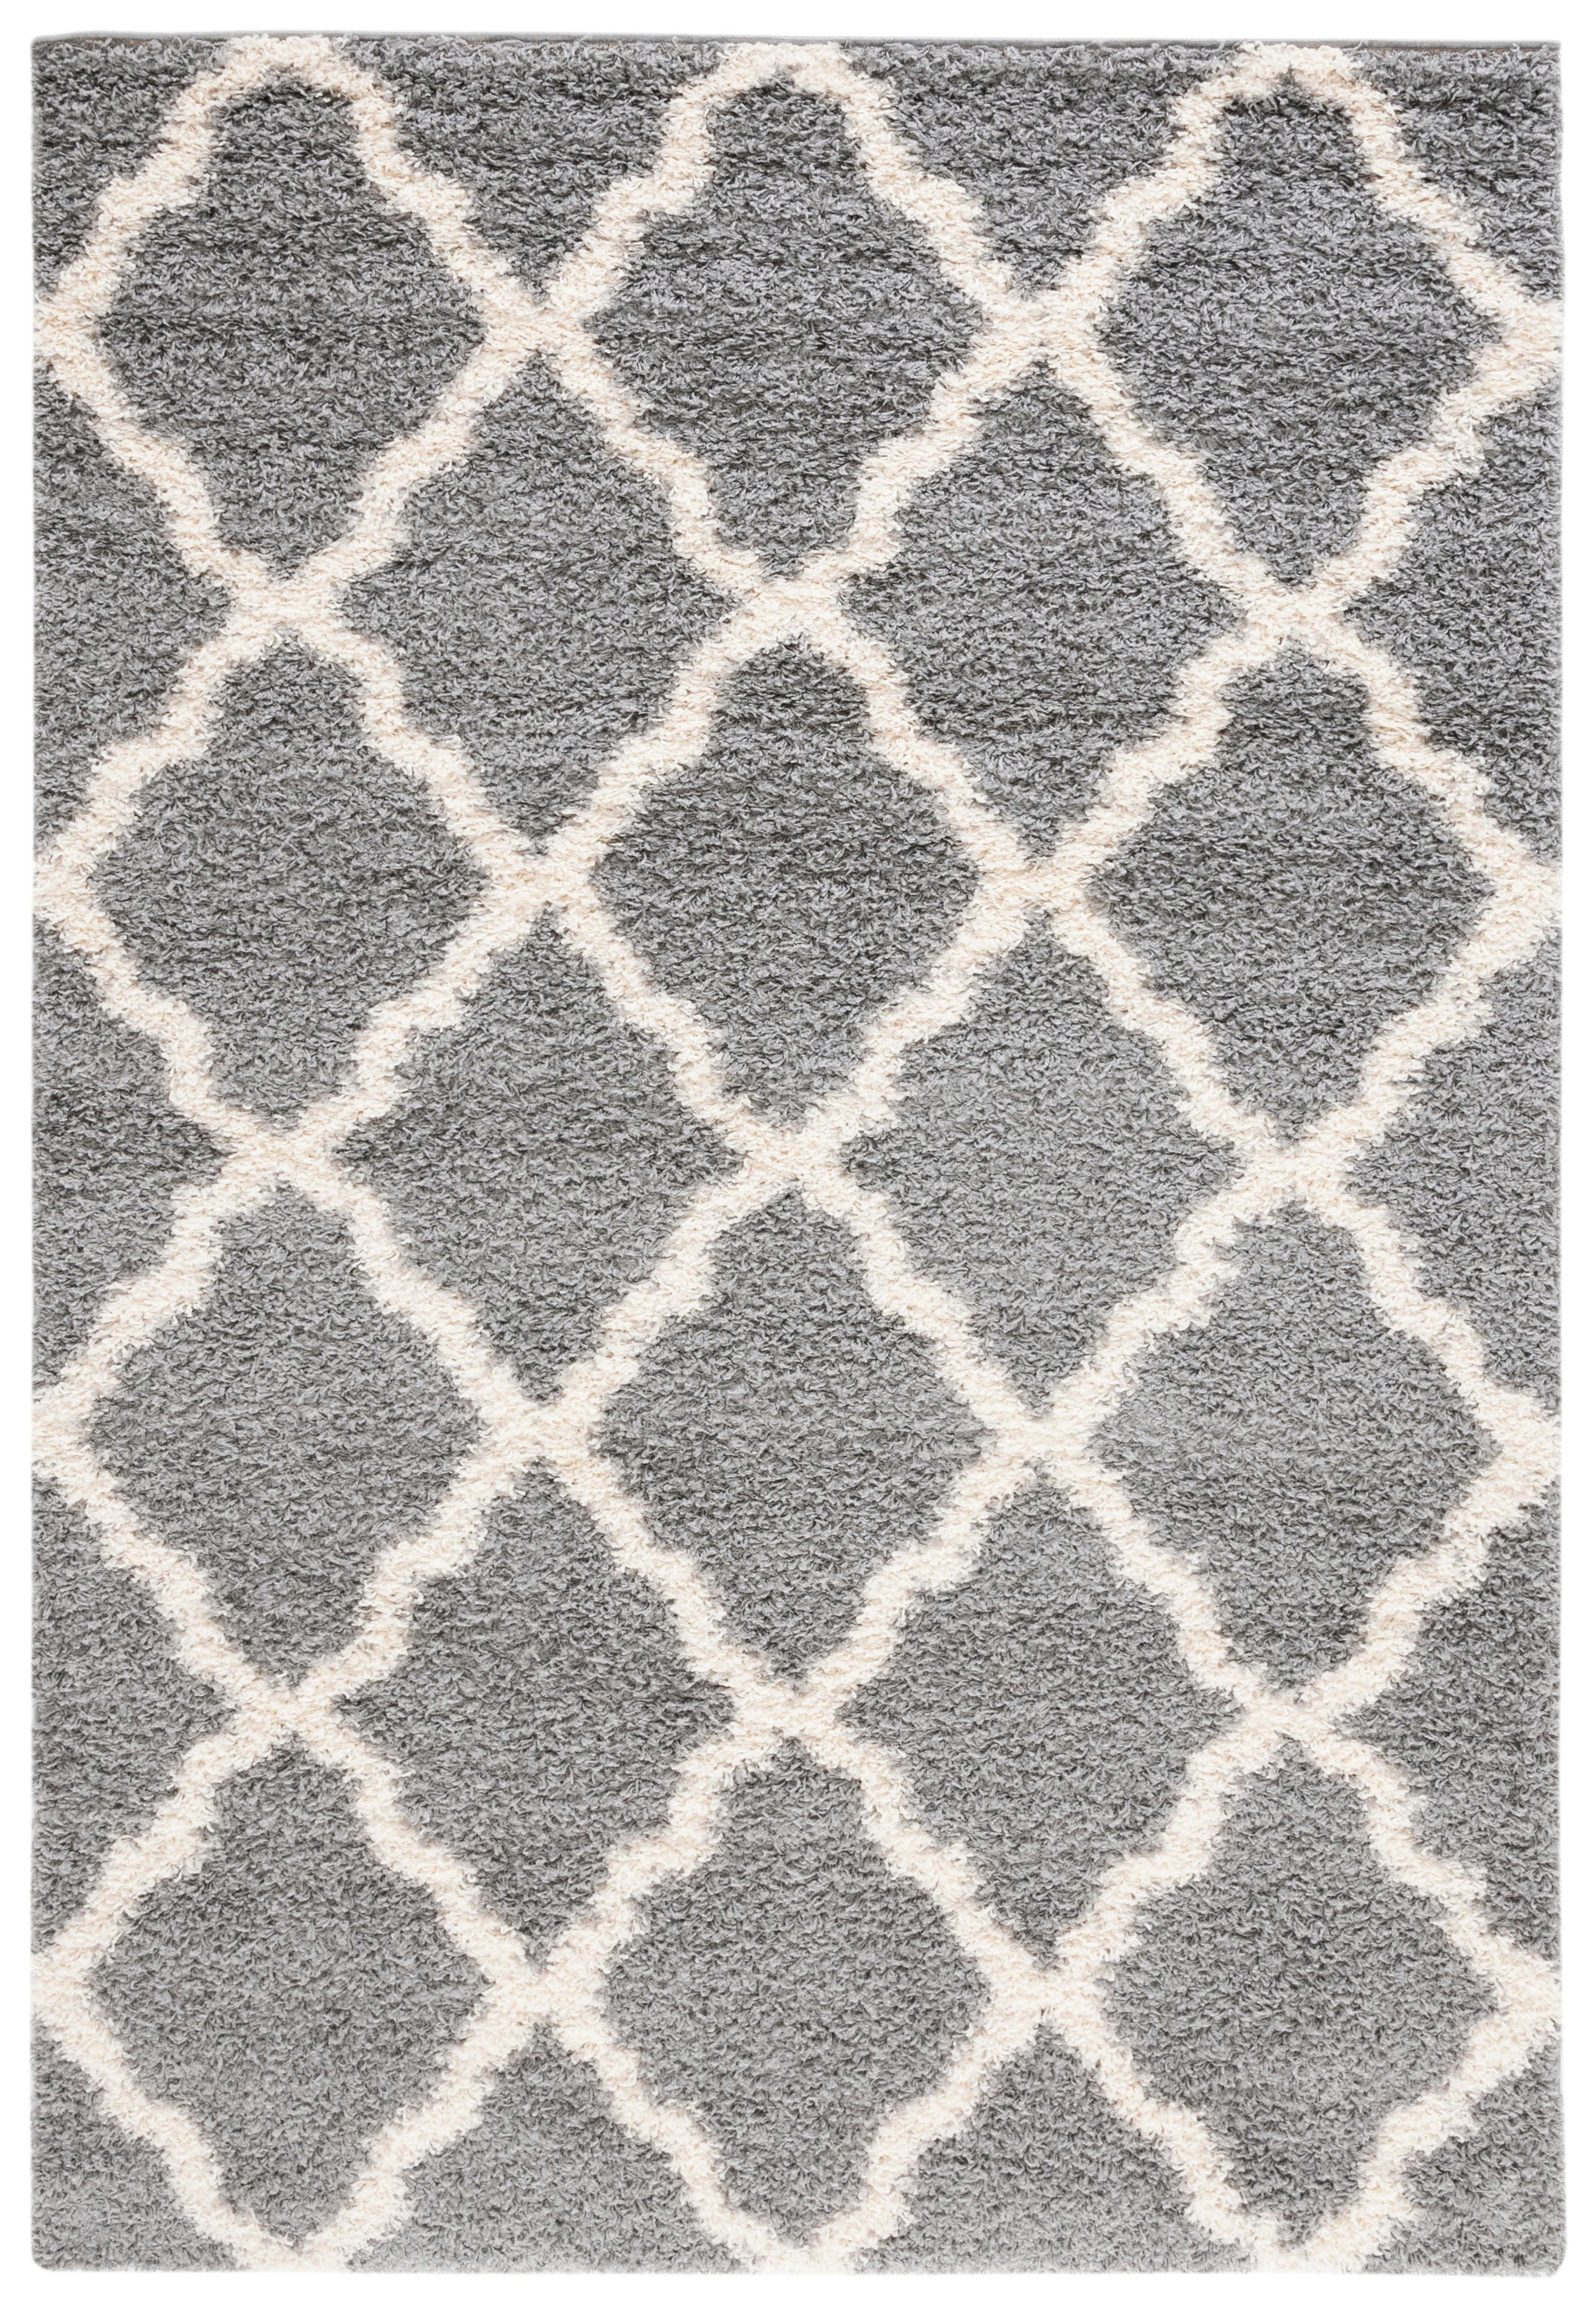 Ivory and Grey Geometric Shag Rug, Synthetic 5'1" x 7'6"